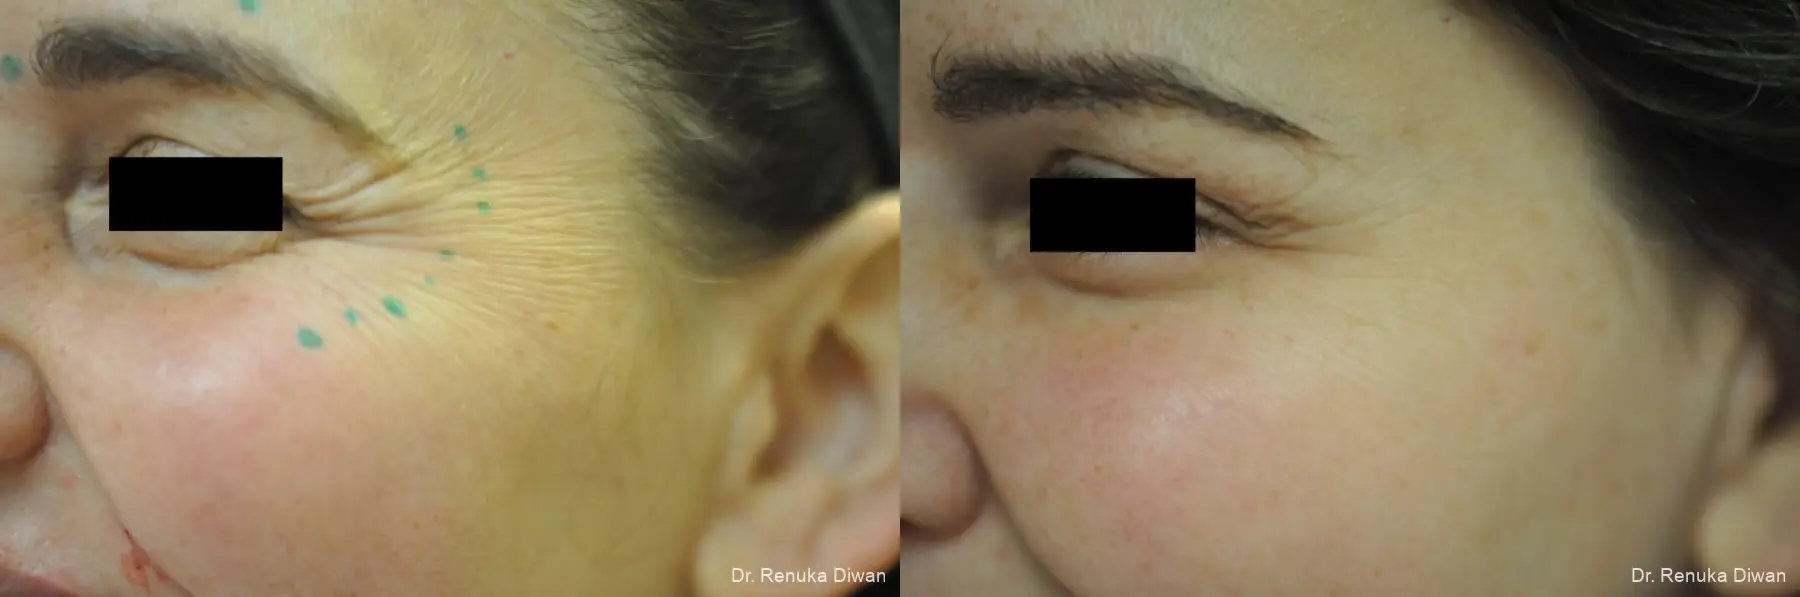 Crows Feet Creases: Patient 5 - Before and After 1